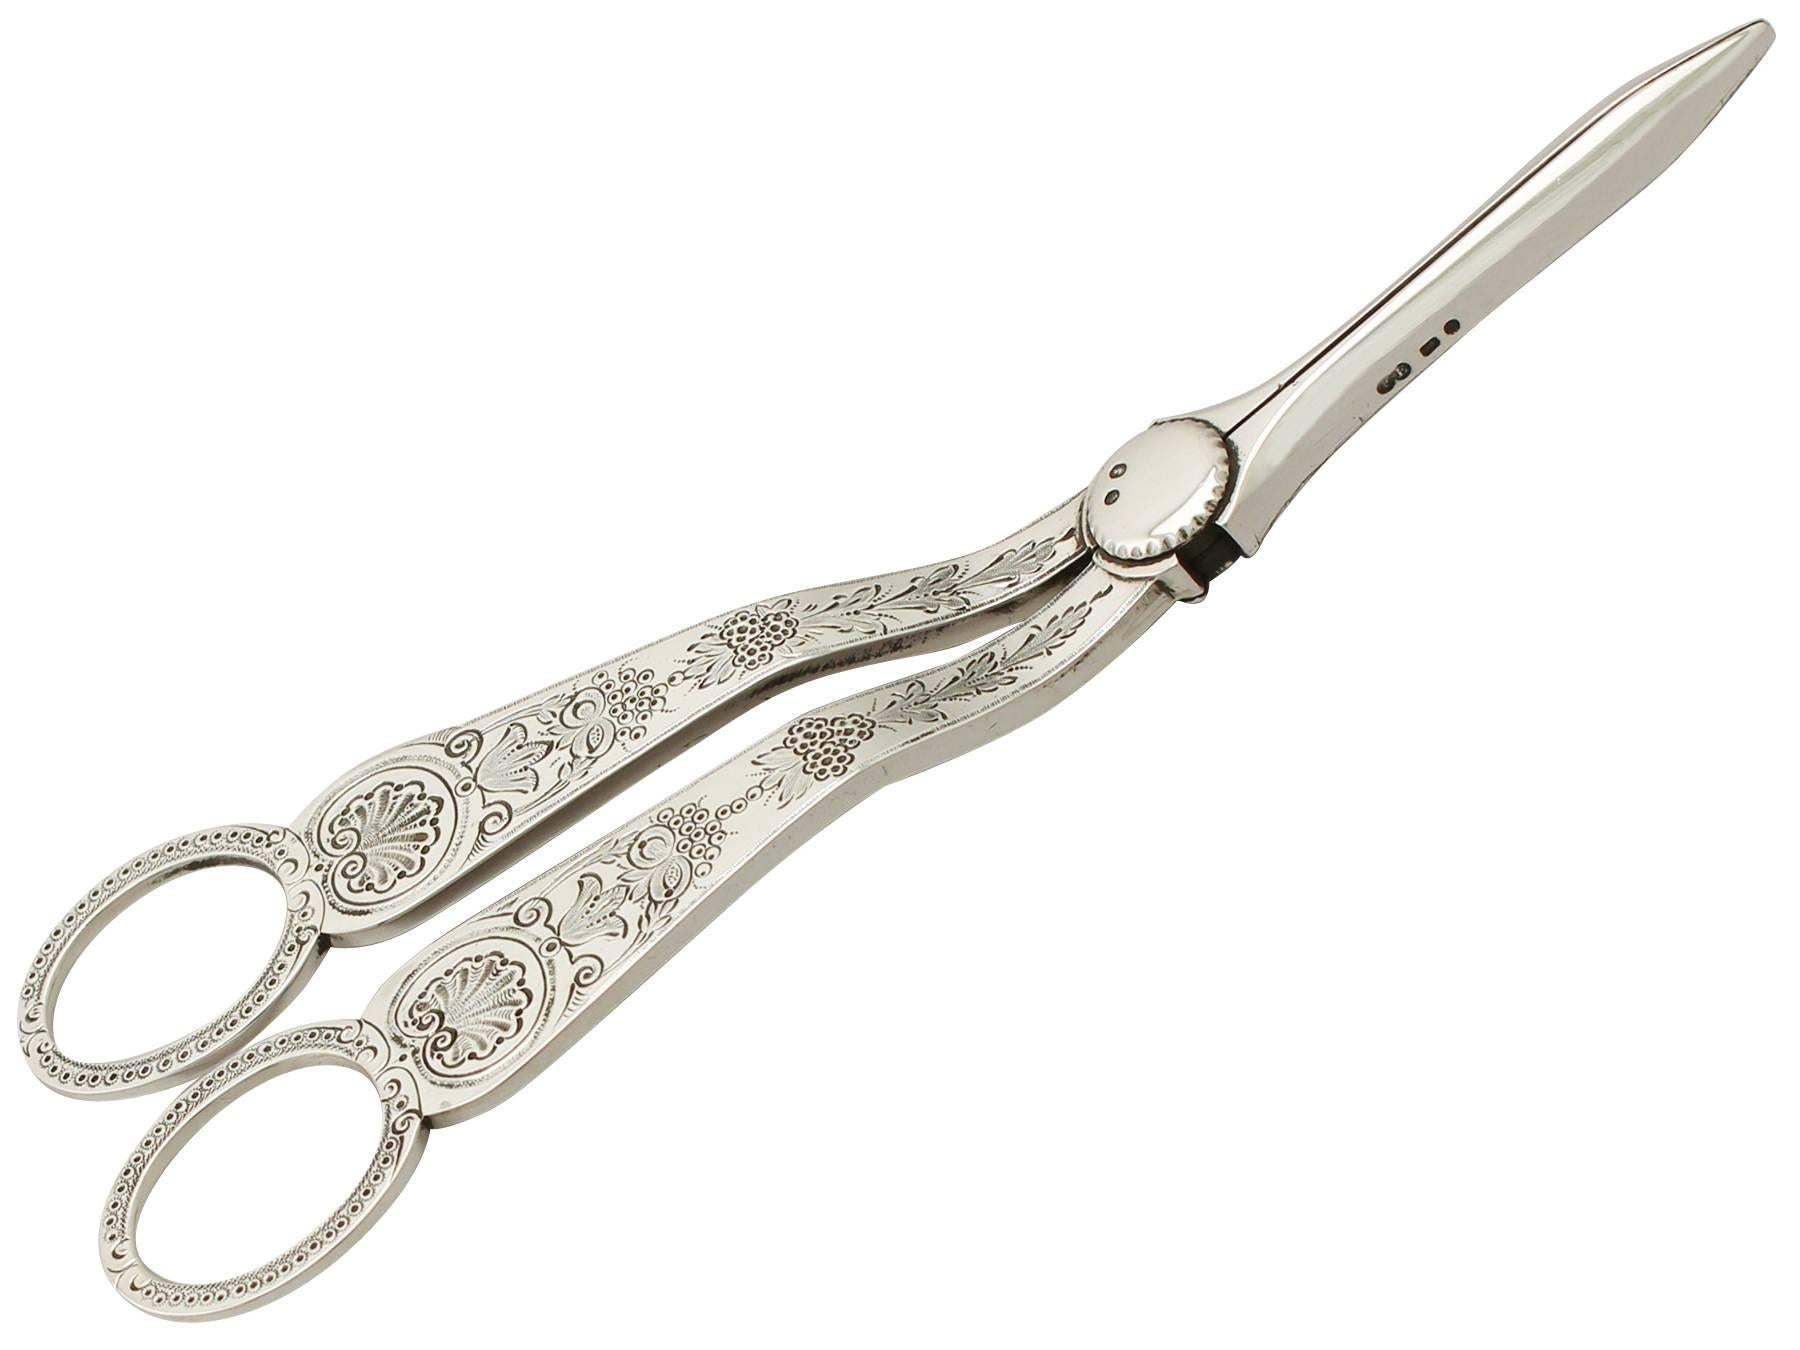 An exceptional, fine and impressive pair of antique Victorian English sterling silver grape shears; an addition to our silver flatware collection.

This exceptional pair of antique Victorian sterling silver grape shears has a hinged scissor